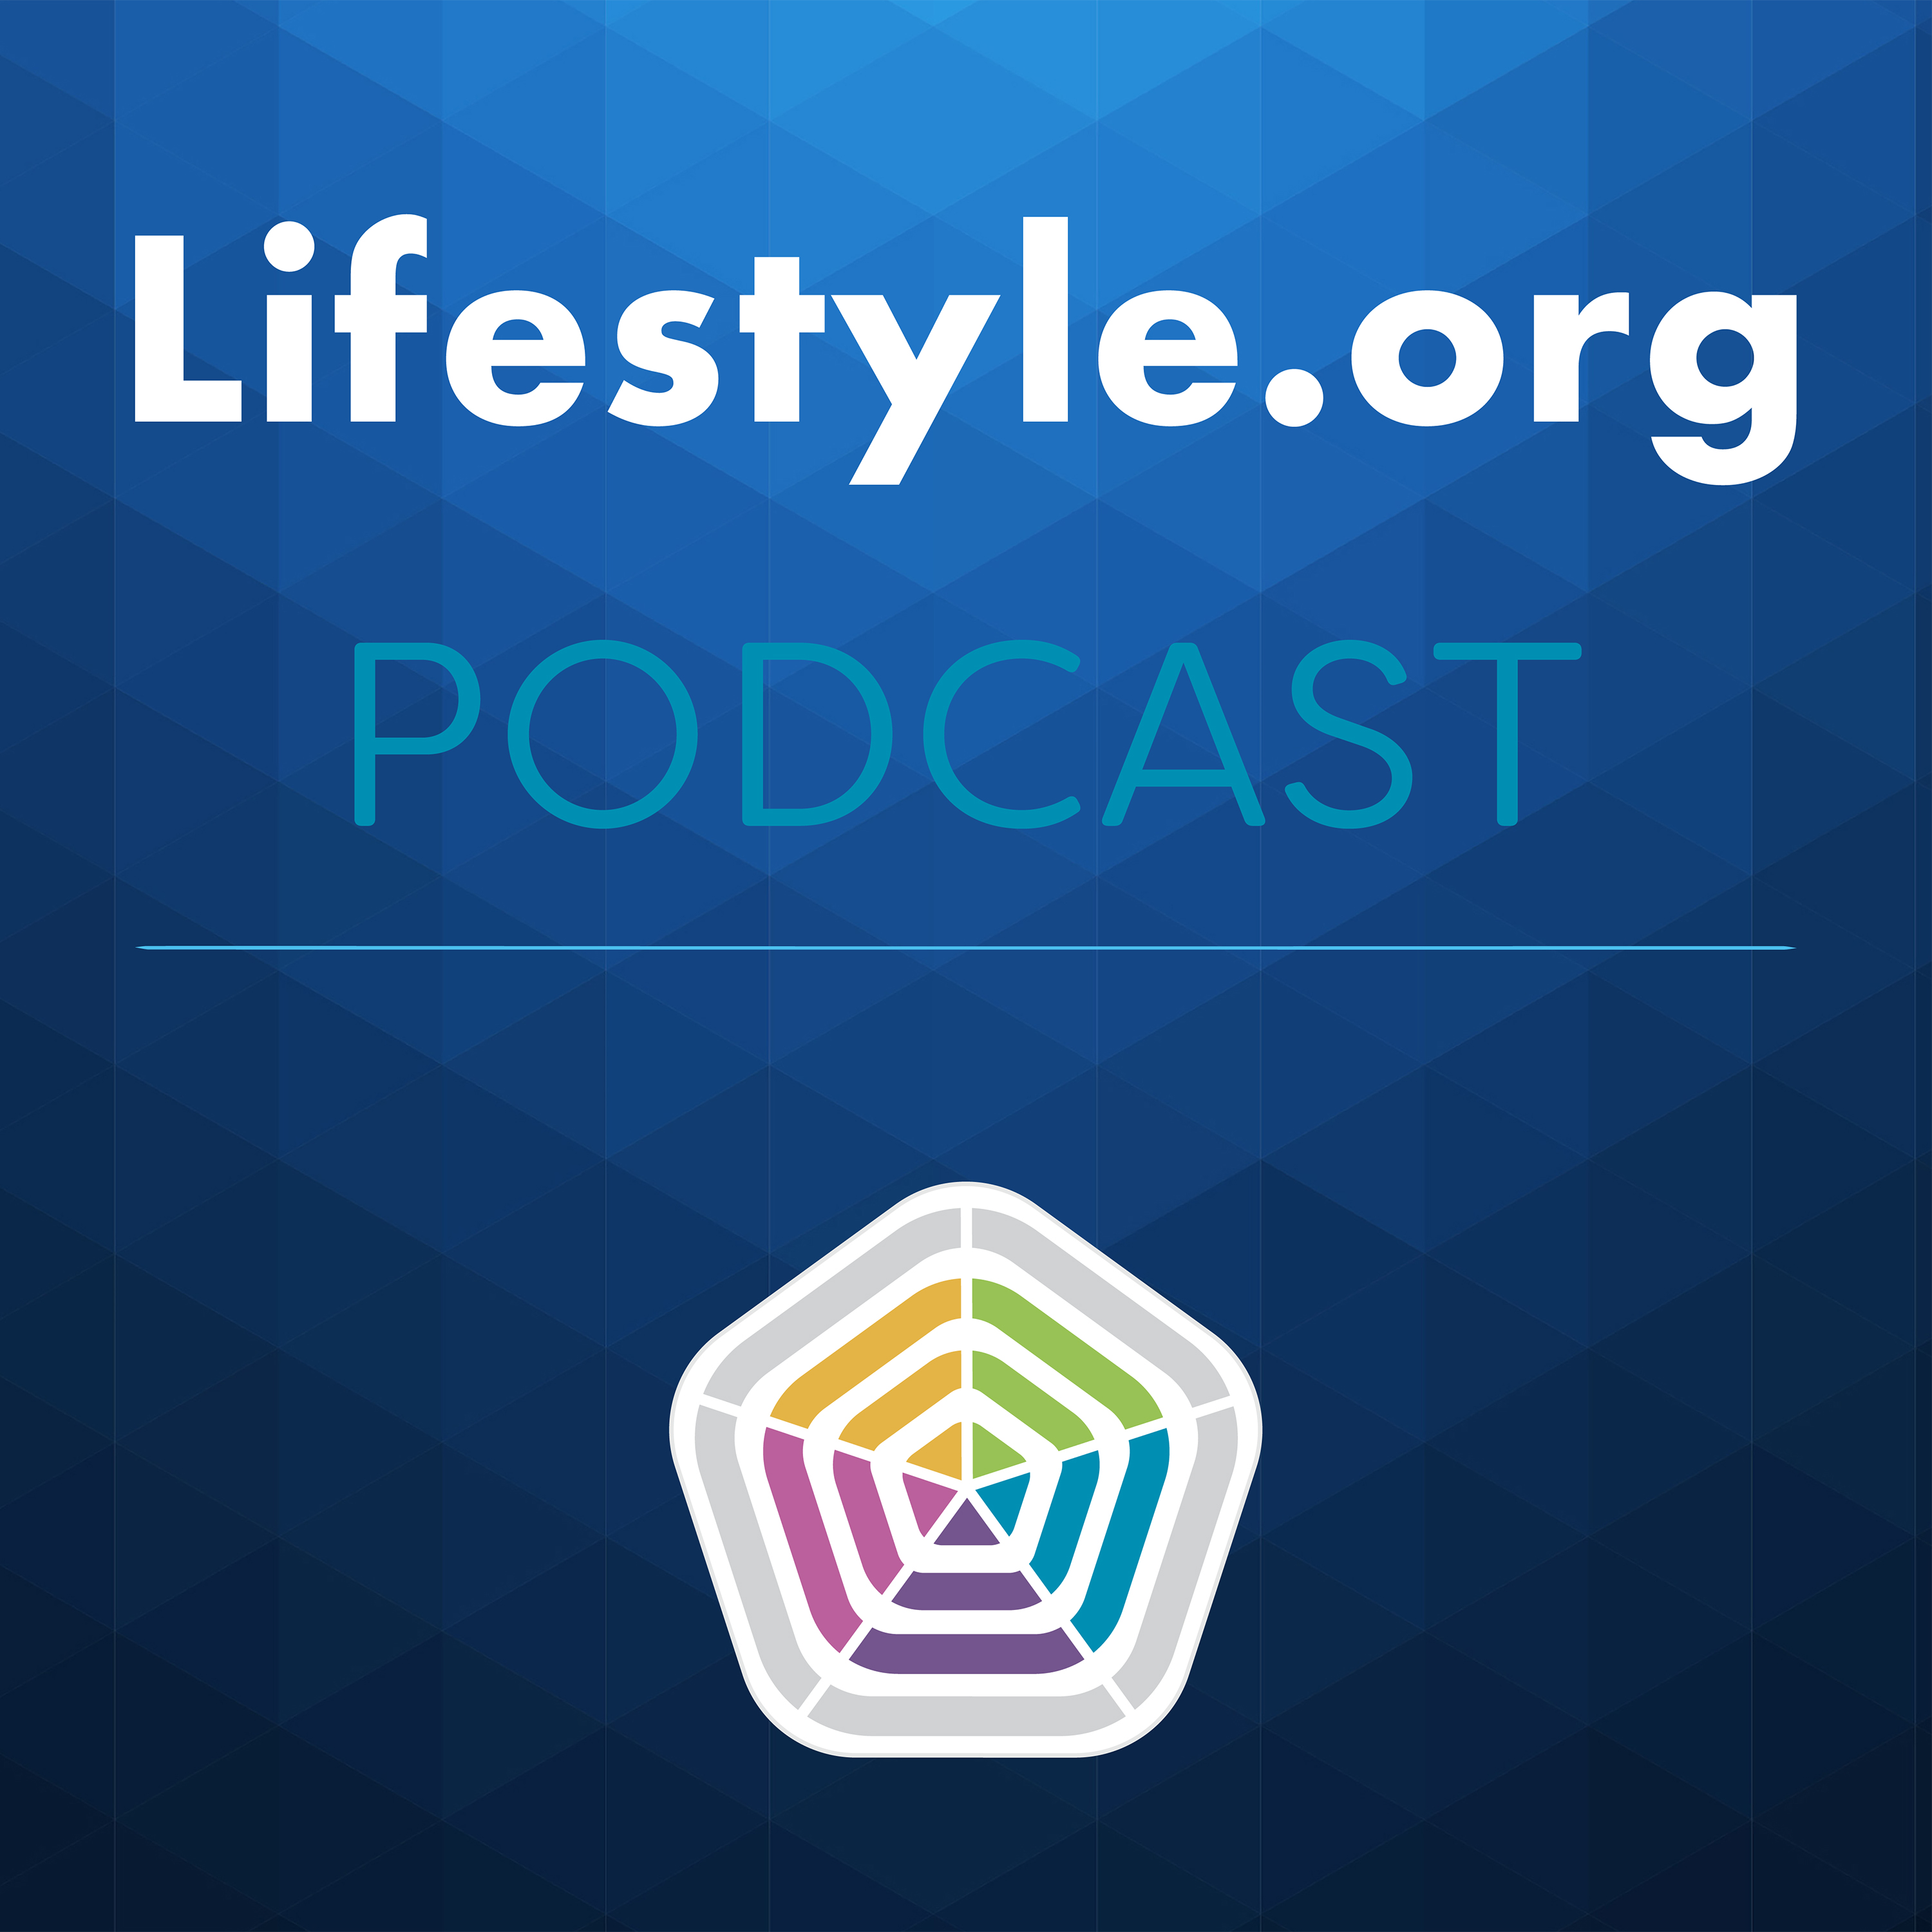 The Lifestyle.org Podcast